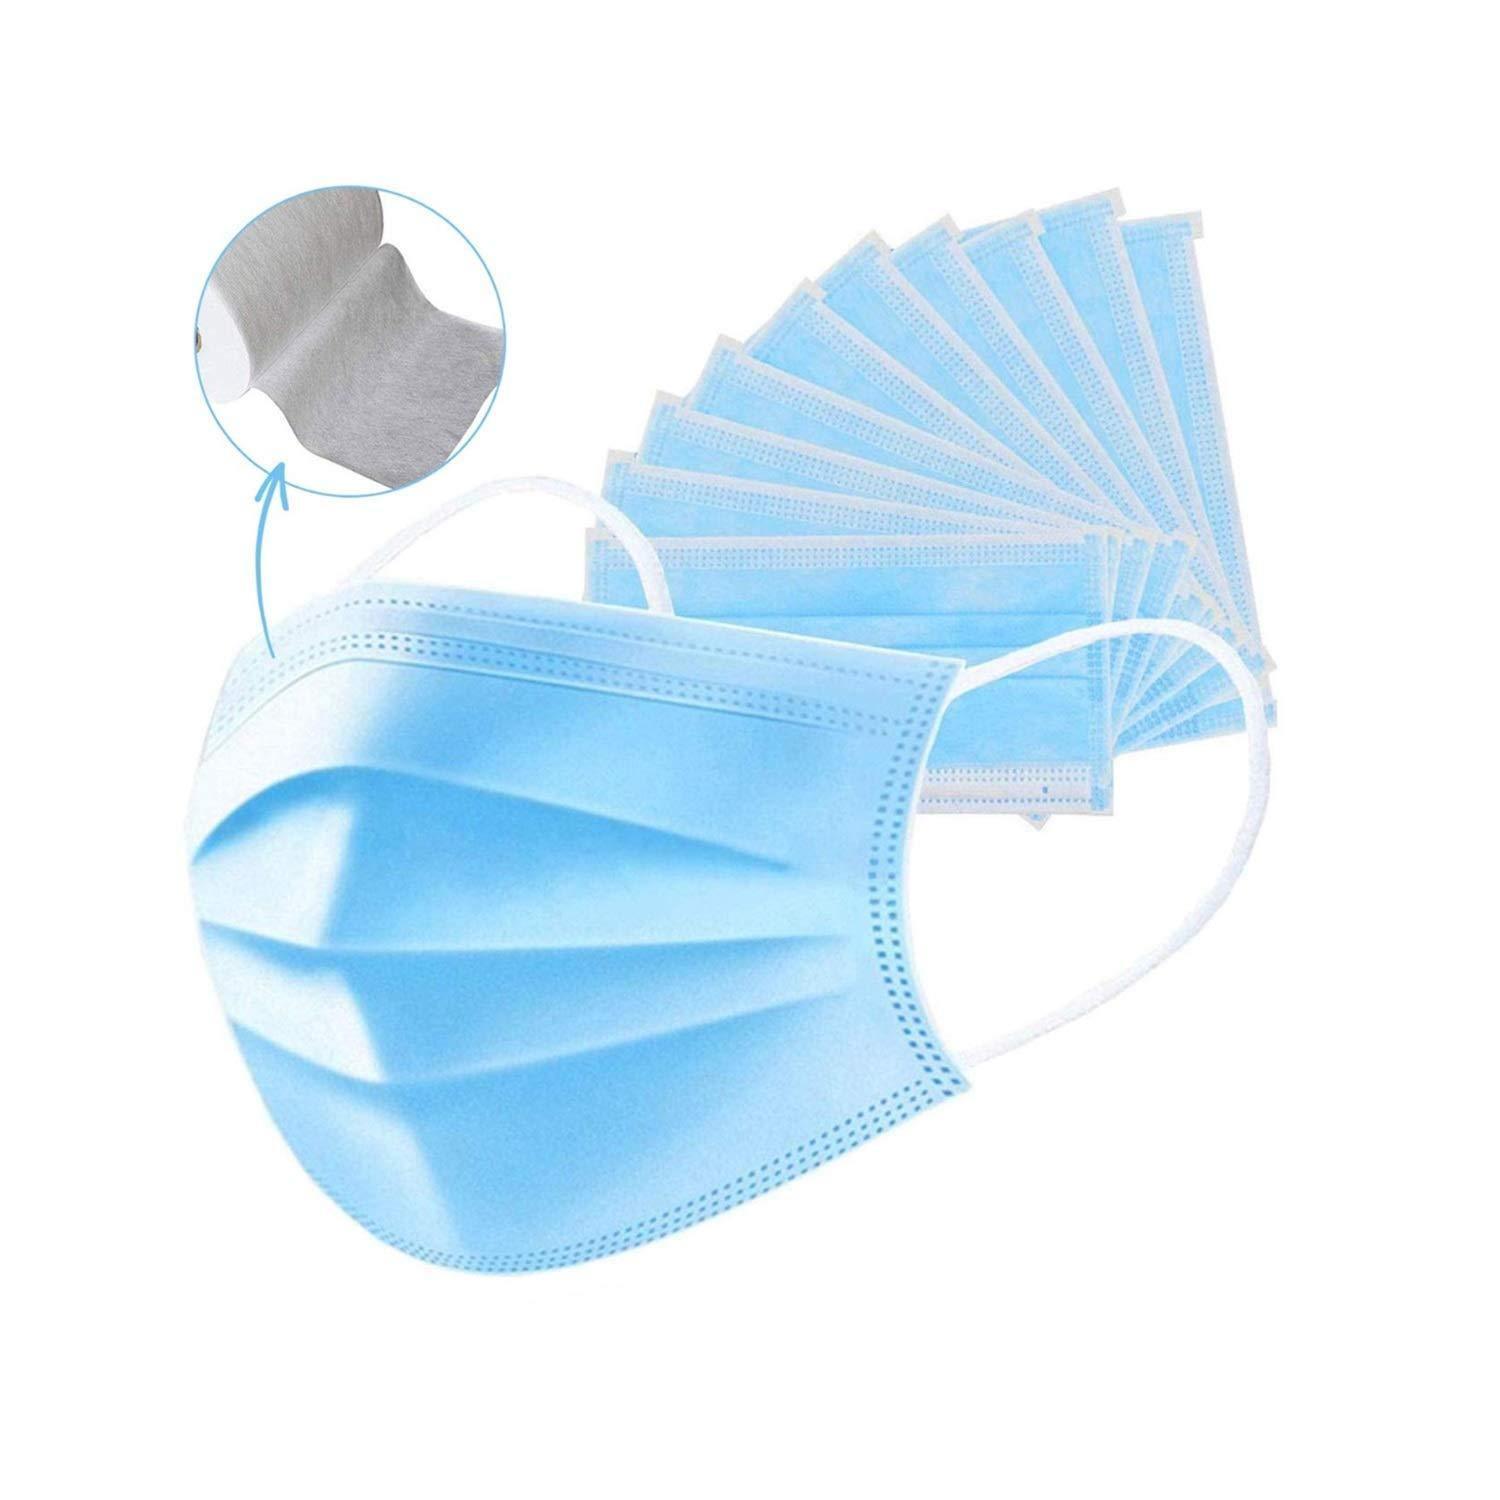 Dealsplant 3 Ply Disposable Surgical Face Mask (Pack of 50pcs)-Health & Personal Care-dealsplant